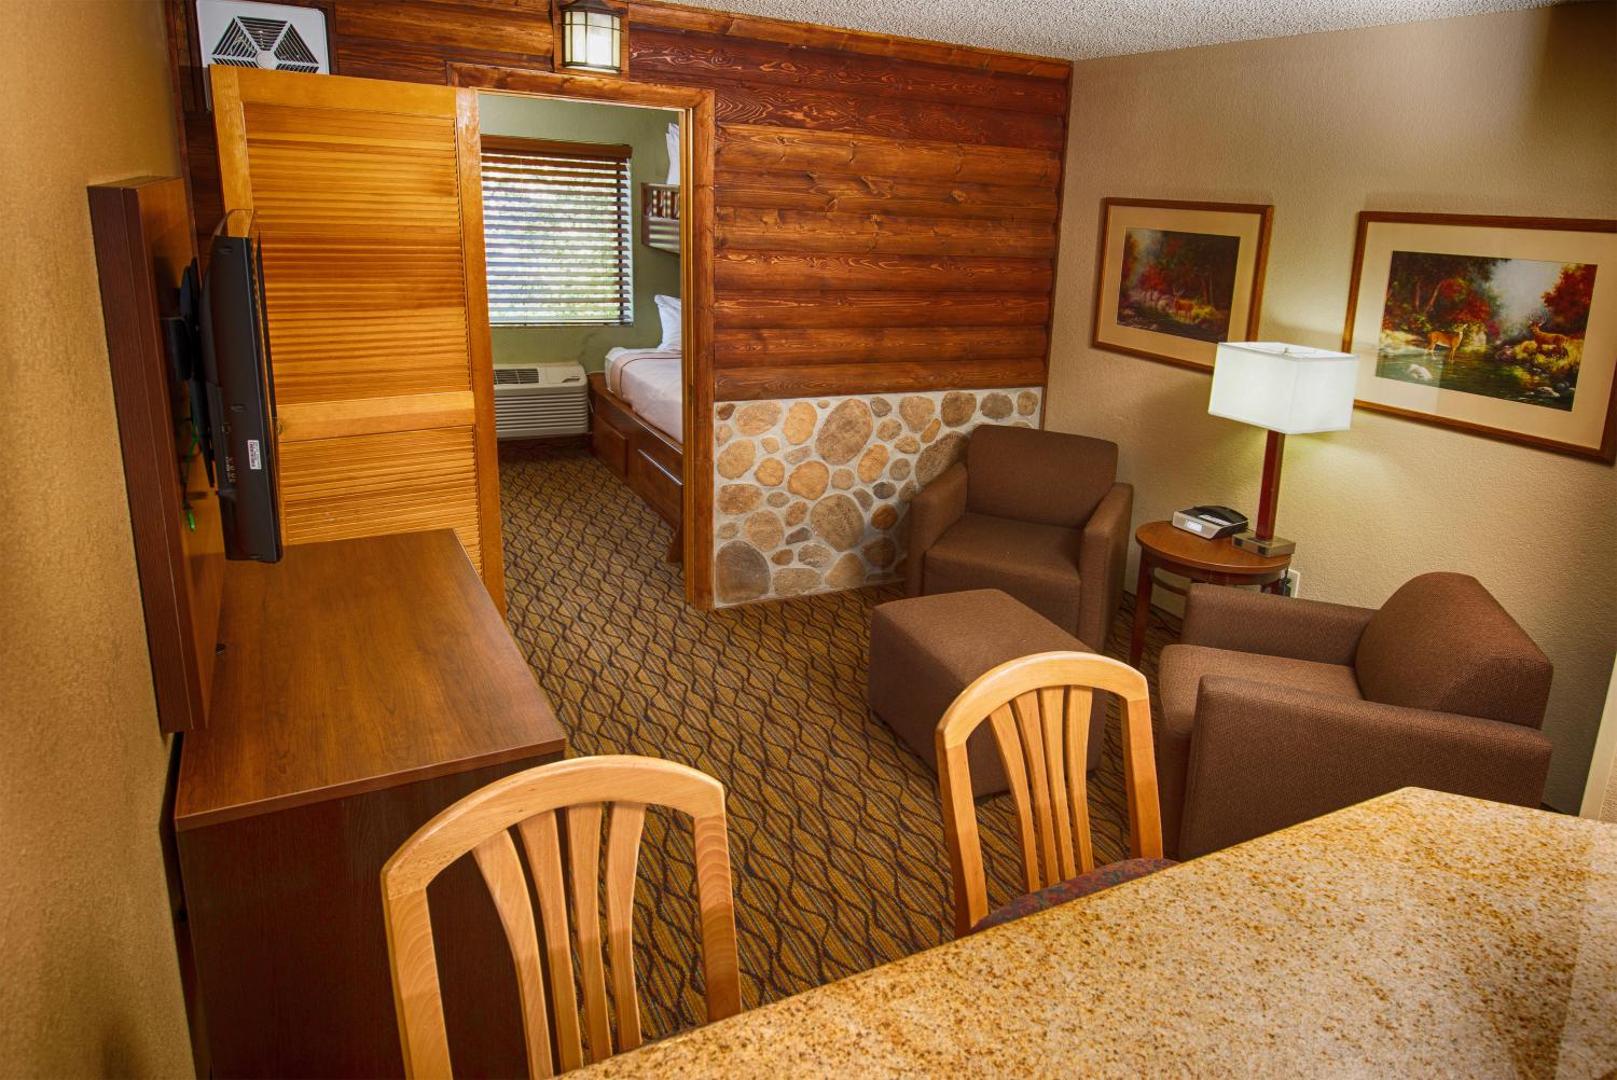 Holiday Inn Express & Suites Grand Canyon